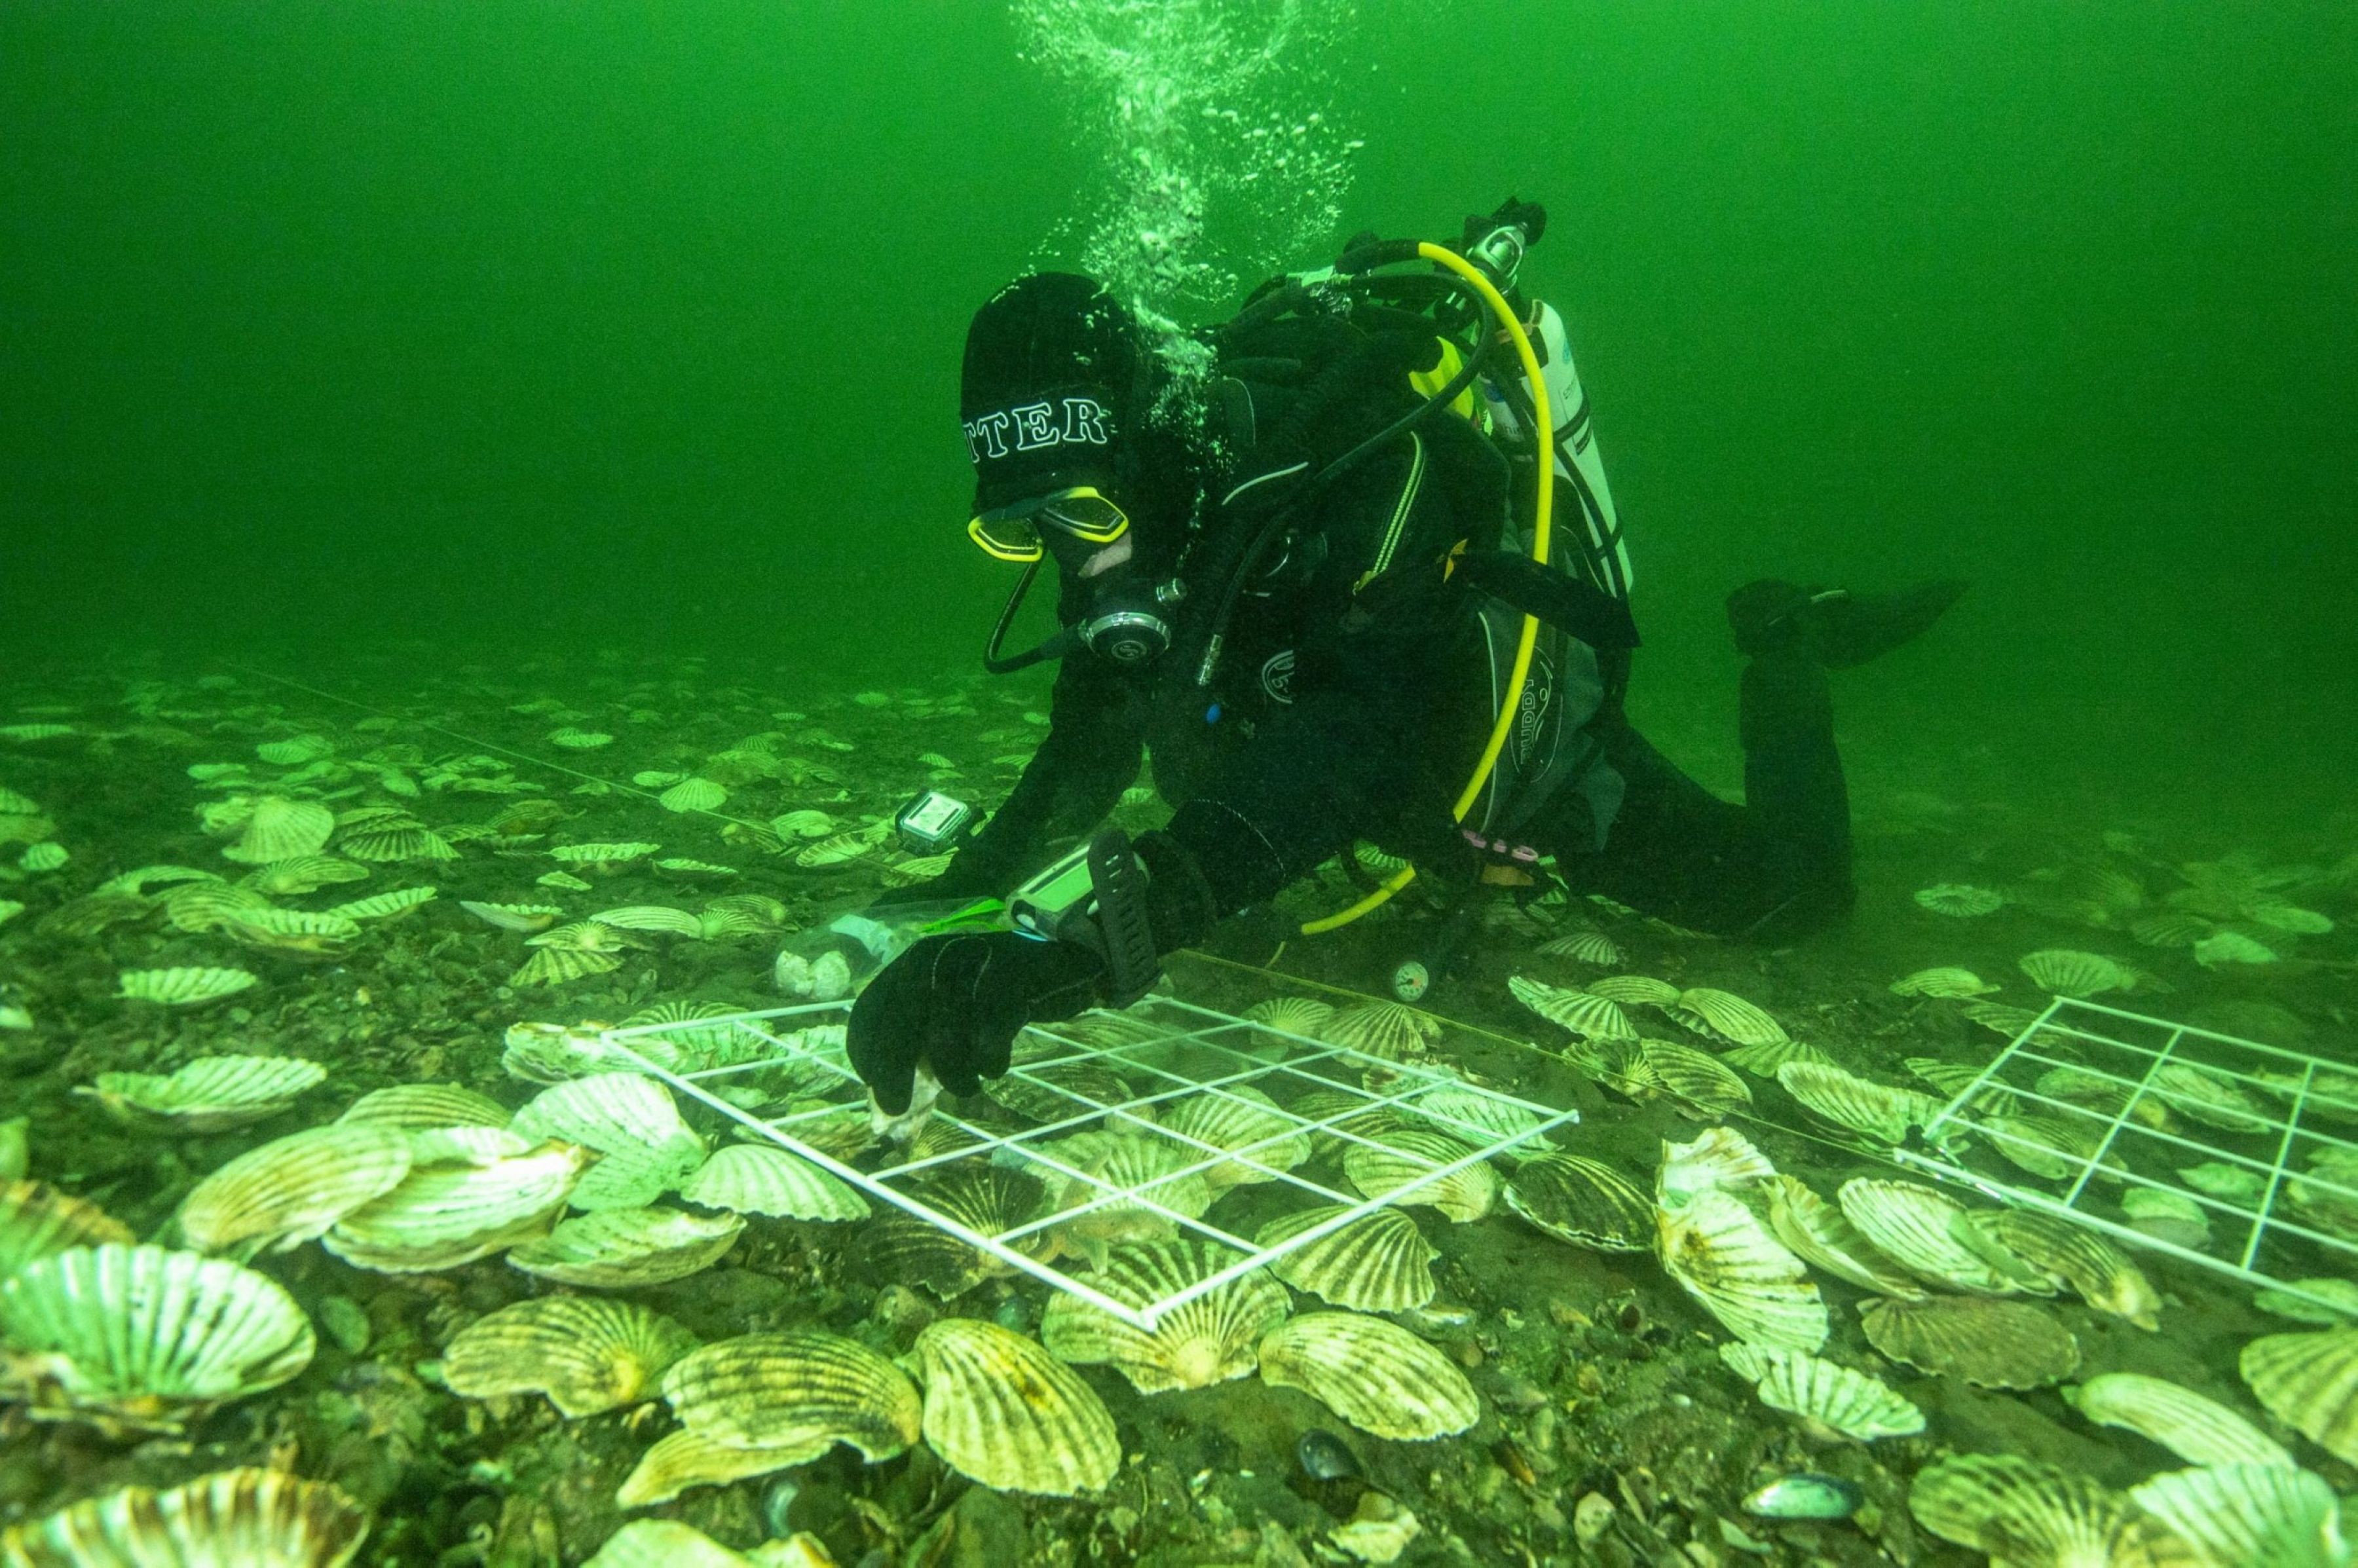 Glenmorangie’s DEEP project lead scientist Dr Bill Sanderson carefully lays Native European Oysters on the bottom of the Dornoch Firth